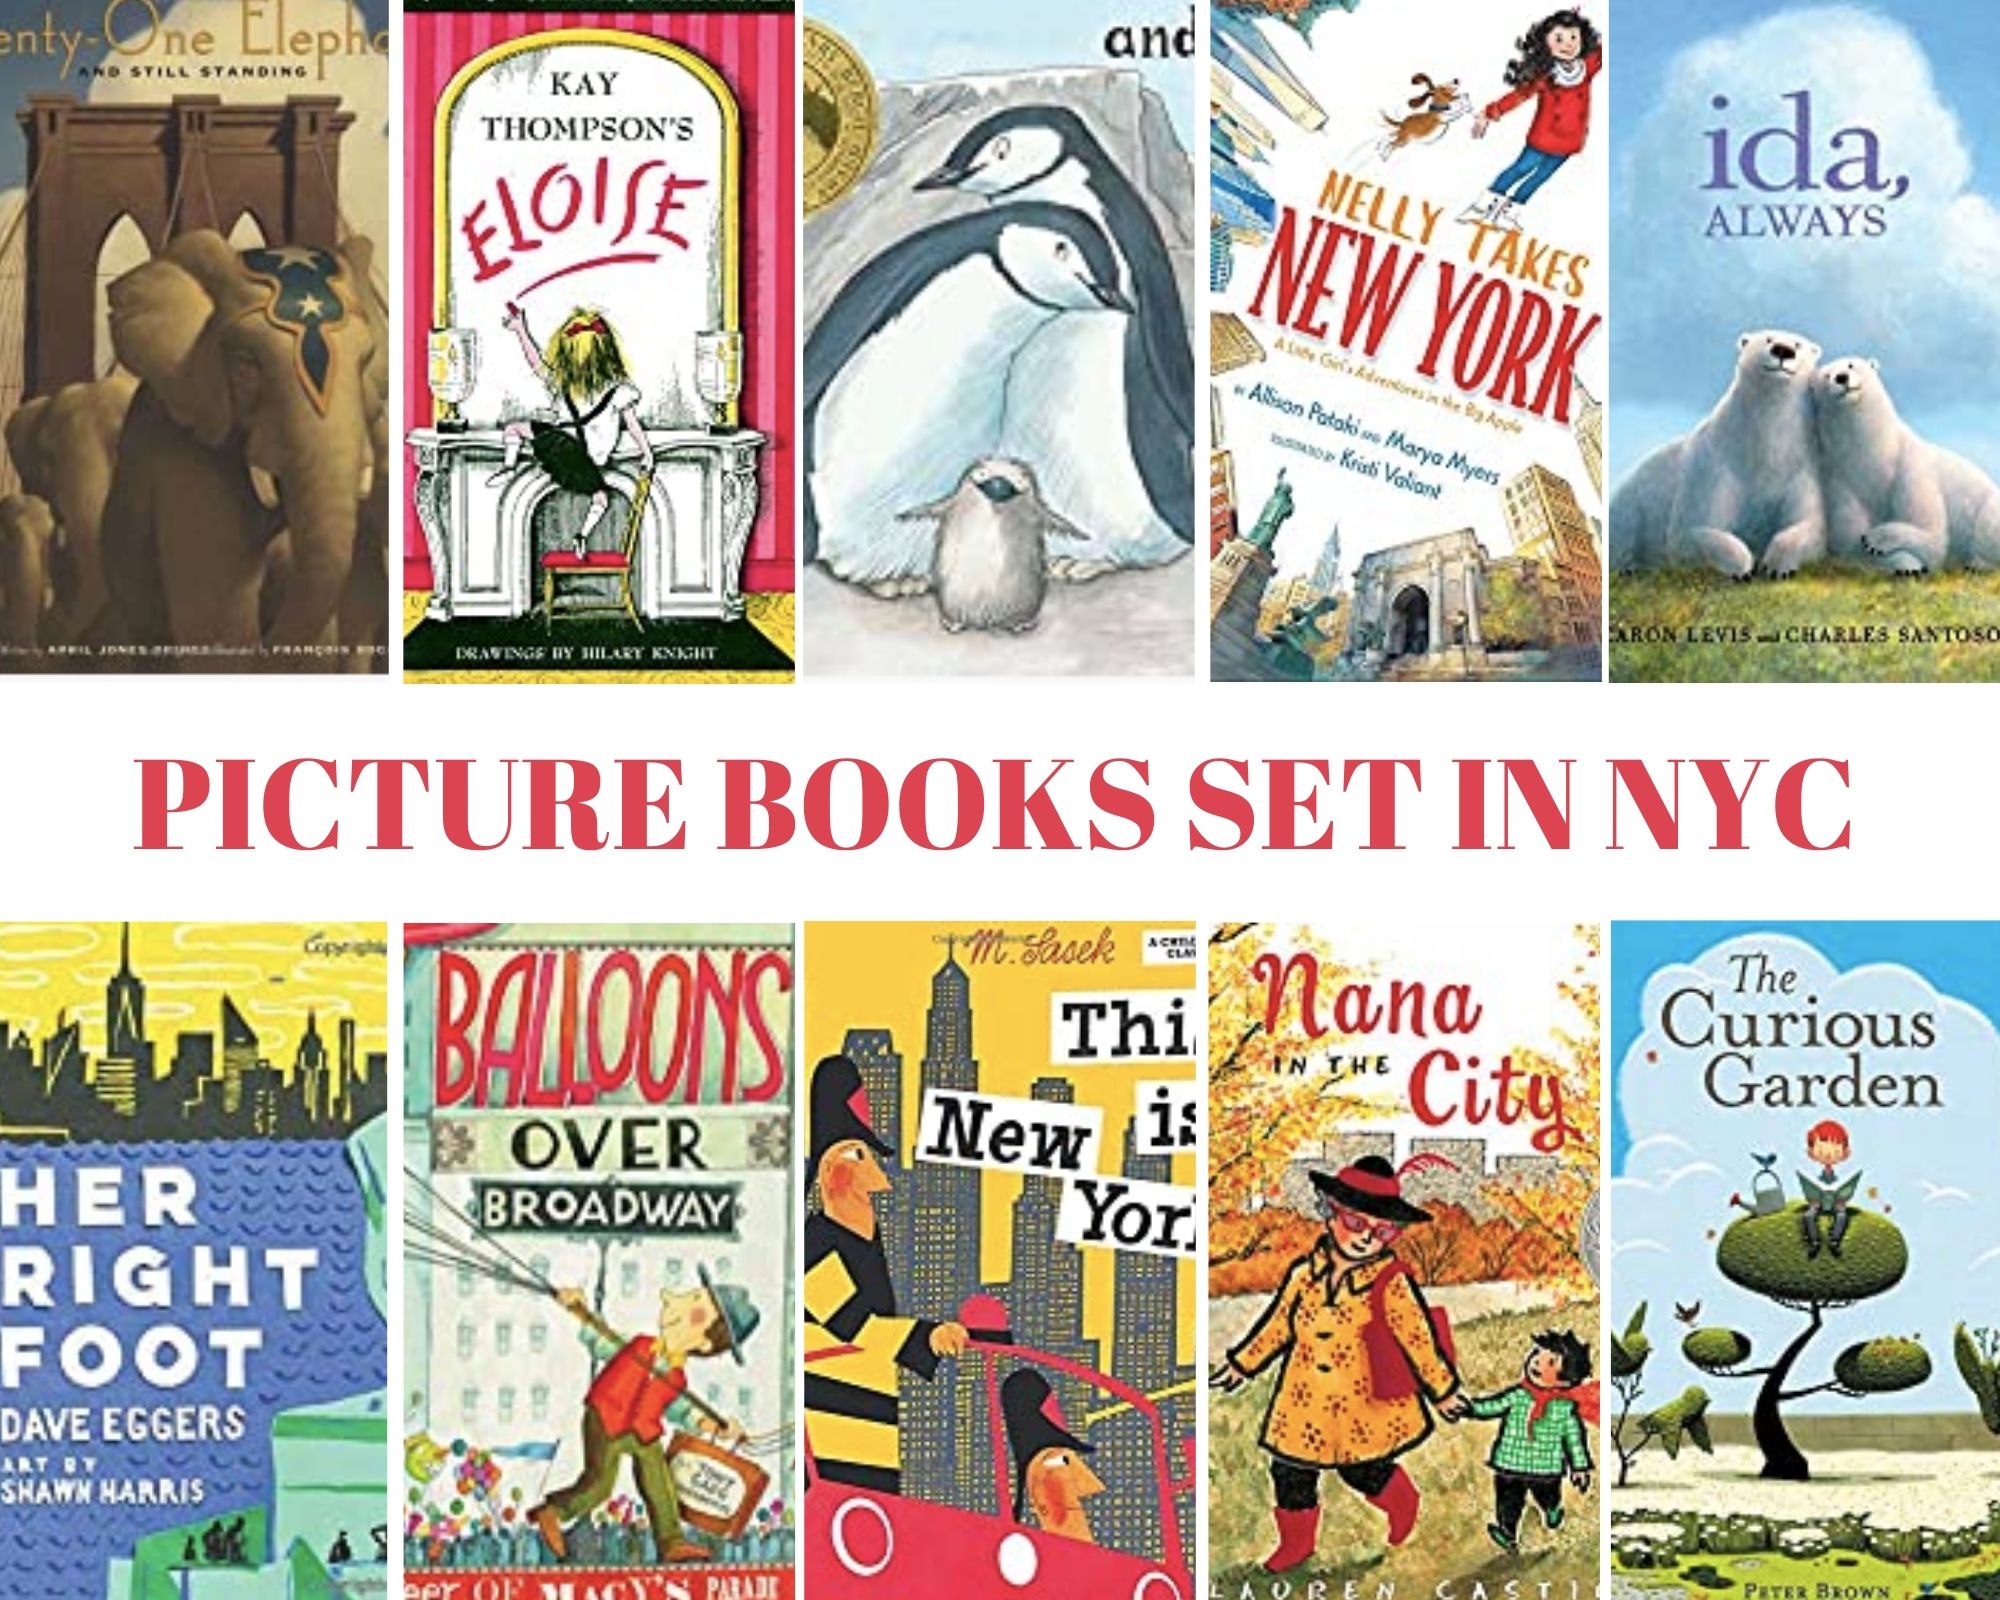 The best children's books of the year, chosen by authors and illustrators